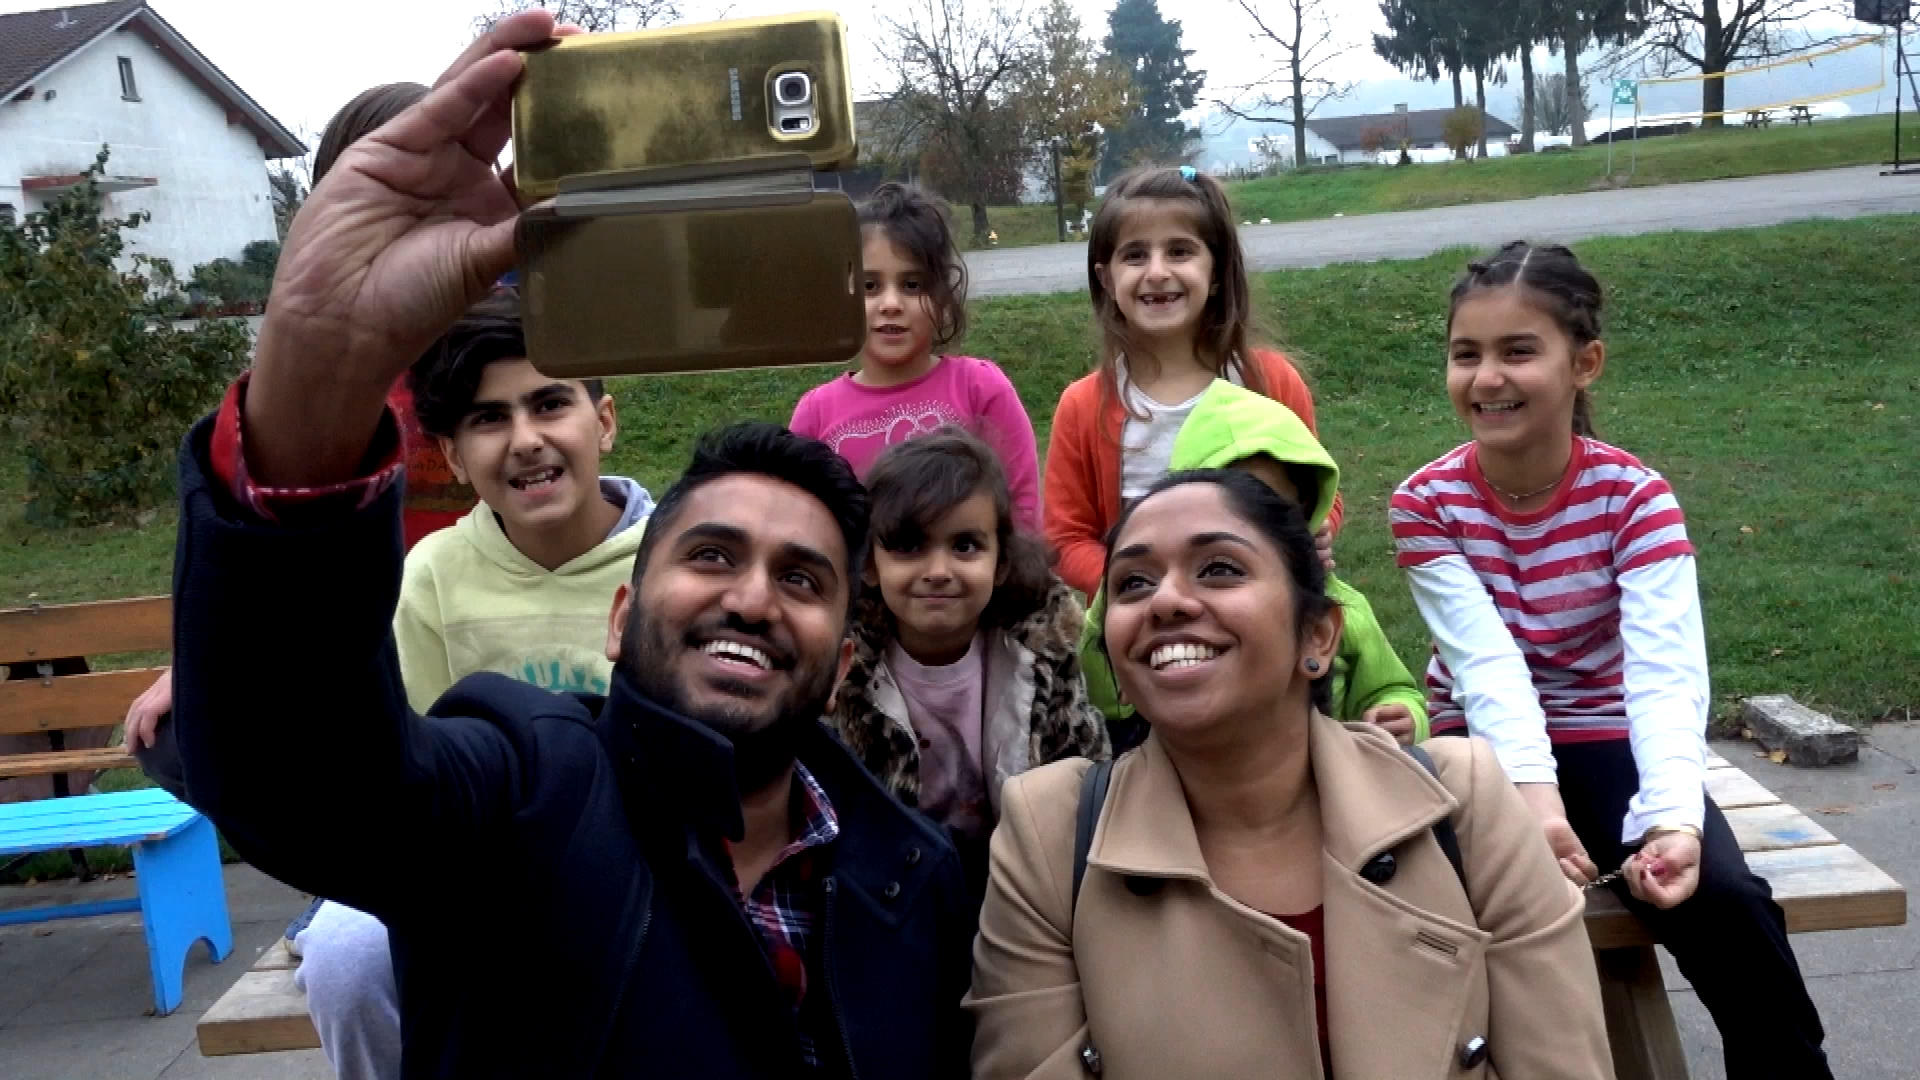 Tama, her brother, and the child asylum seekers at a refugee centre take a selfie